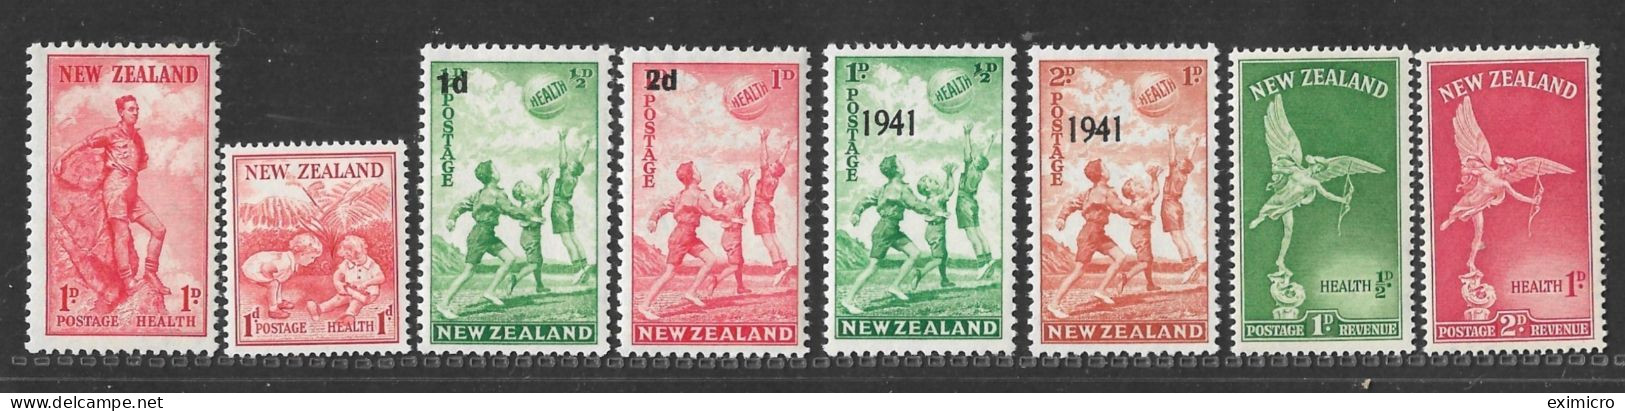 NEW ZEALAND UNMOUNTED MINT COLLECTION OF HEALTH SETS 1937,1938,1939,1941,1947 Cat £19.85 - Neufs